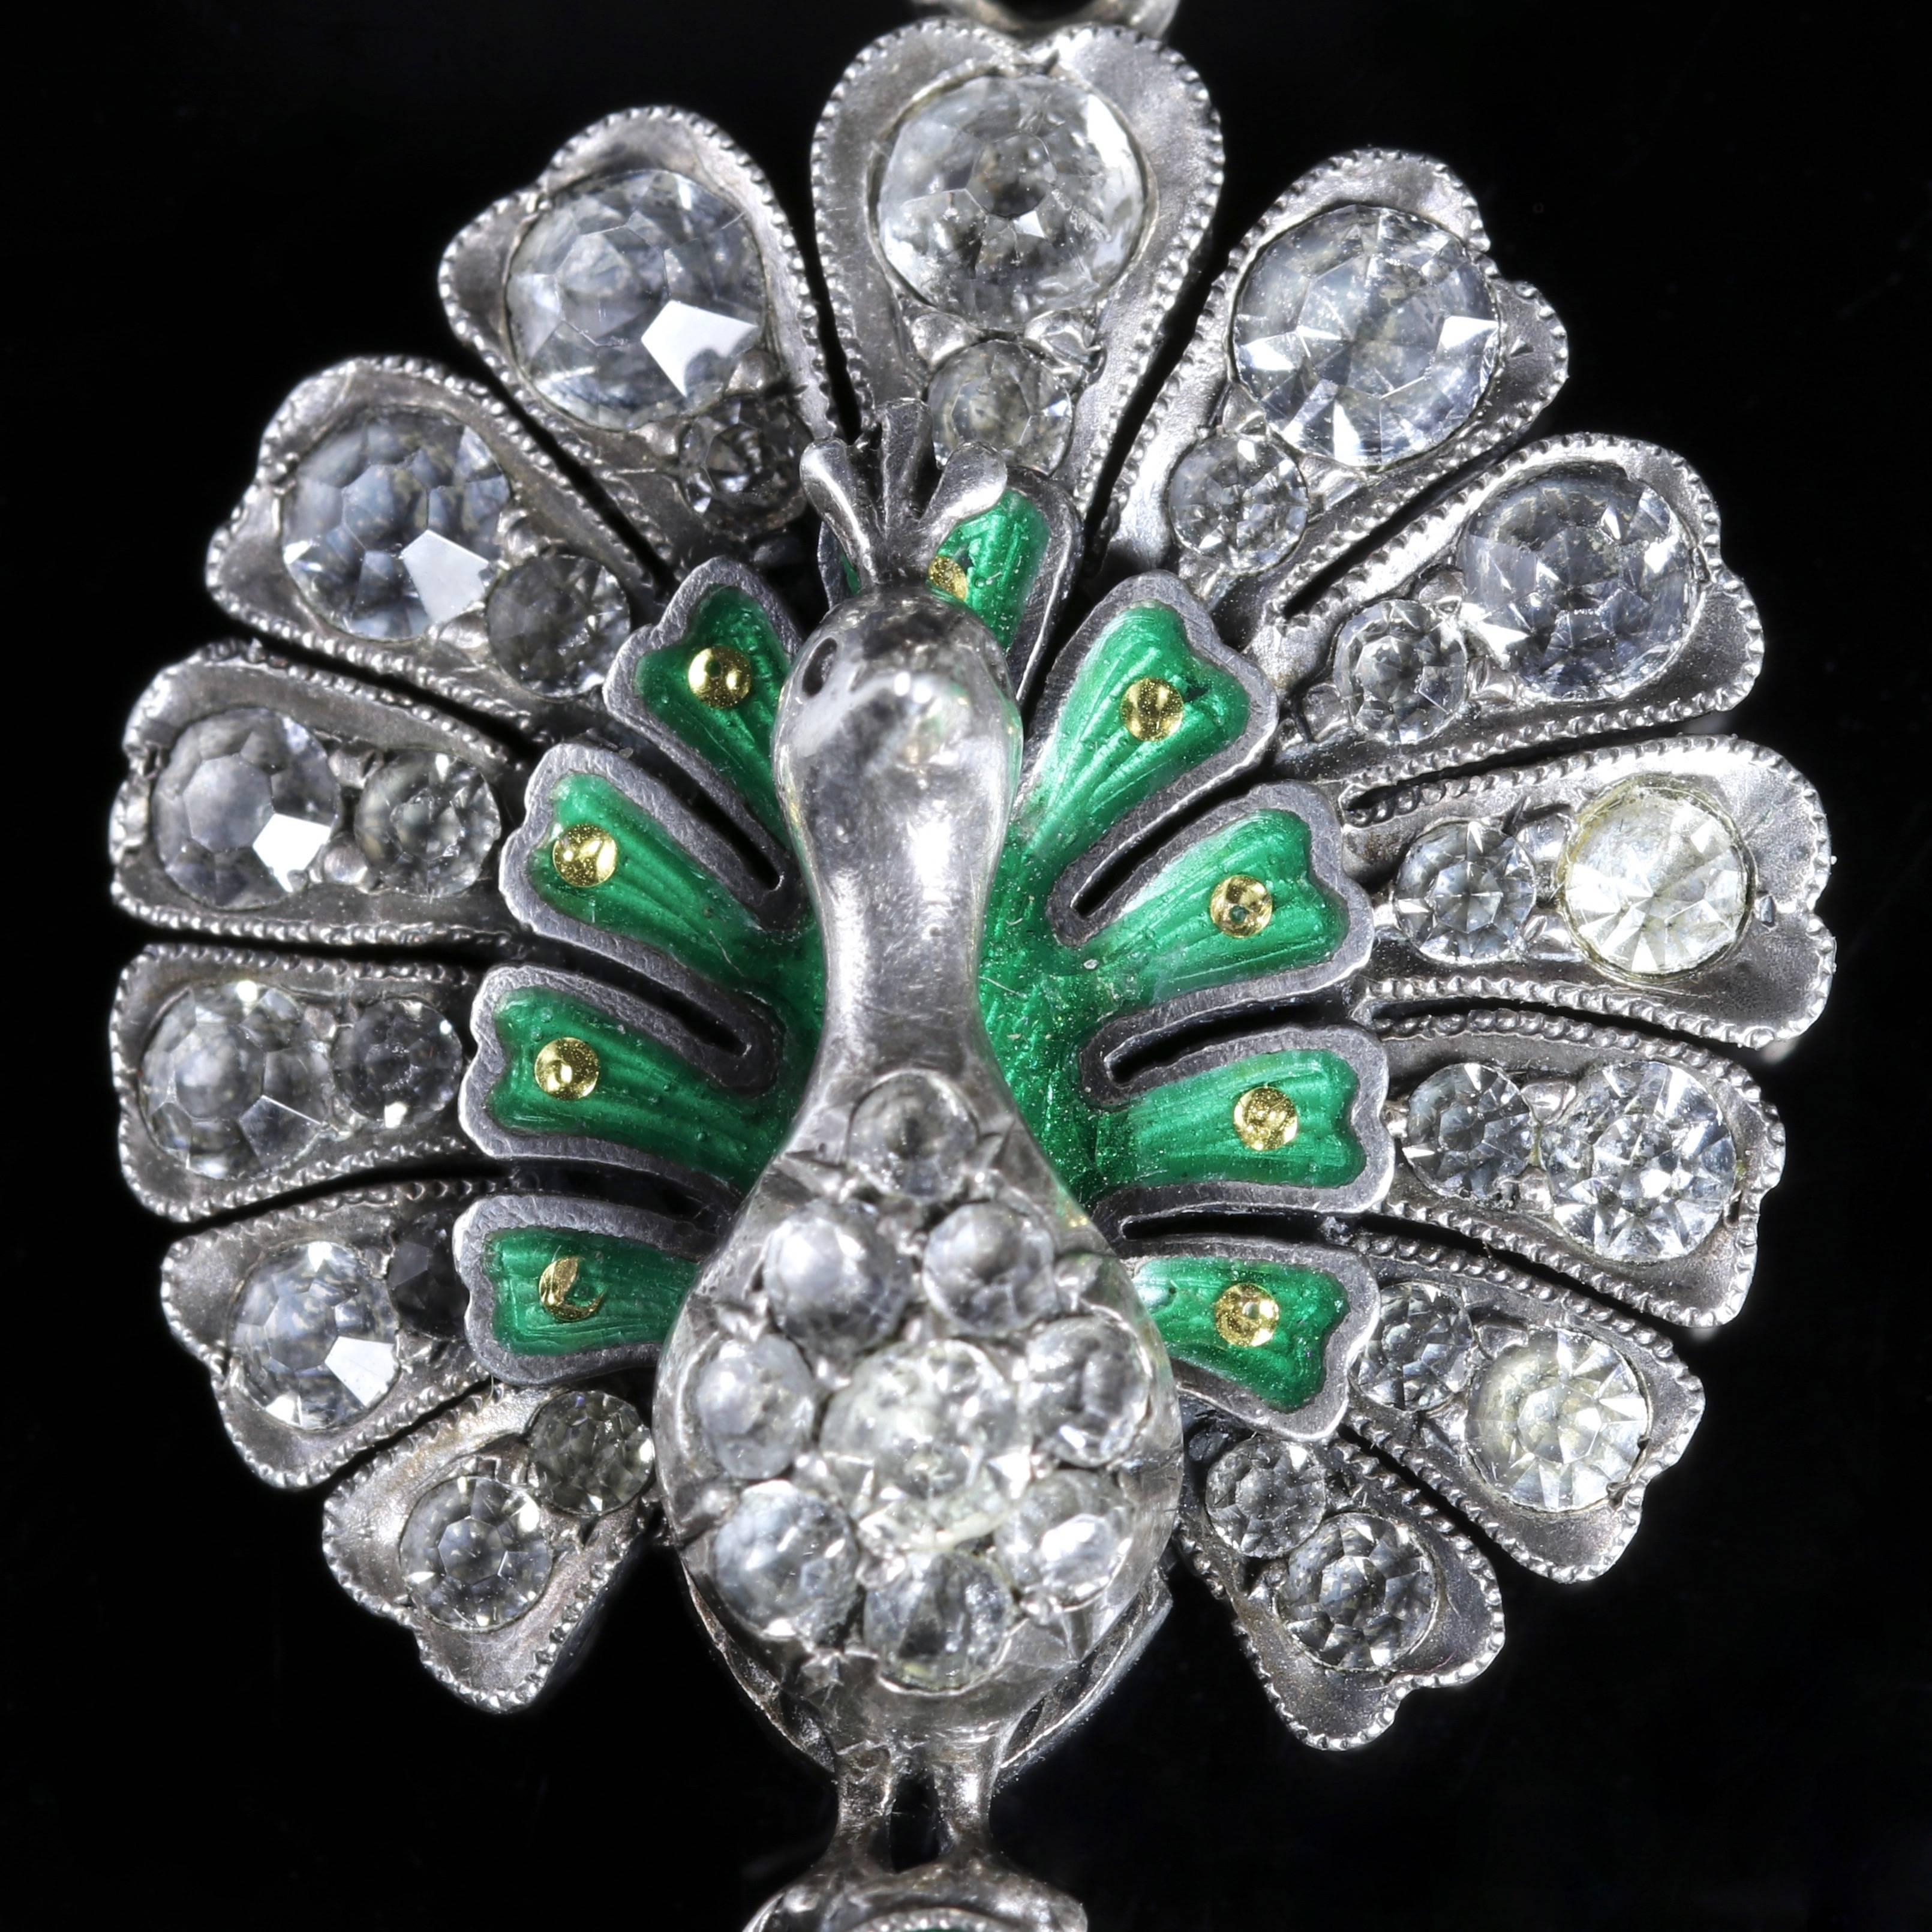 To read more please click continue reading below-

This fabulous Sterling Silver Victorian pendant depicts a peacock, all authentic Circa 1900 representing the Suffragette period.

Suffragettes liked to be depicted as feminine, their jewellery was